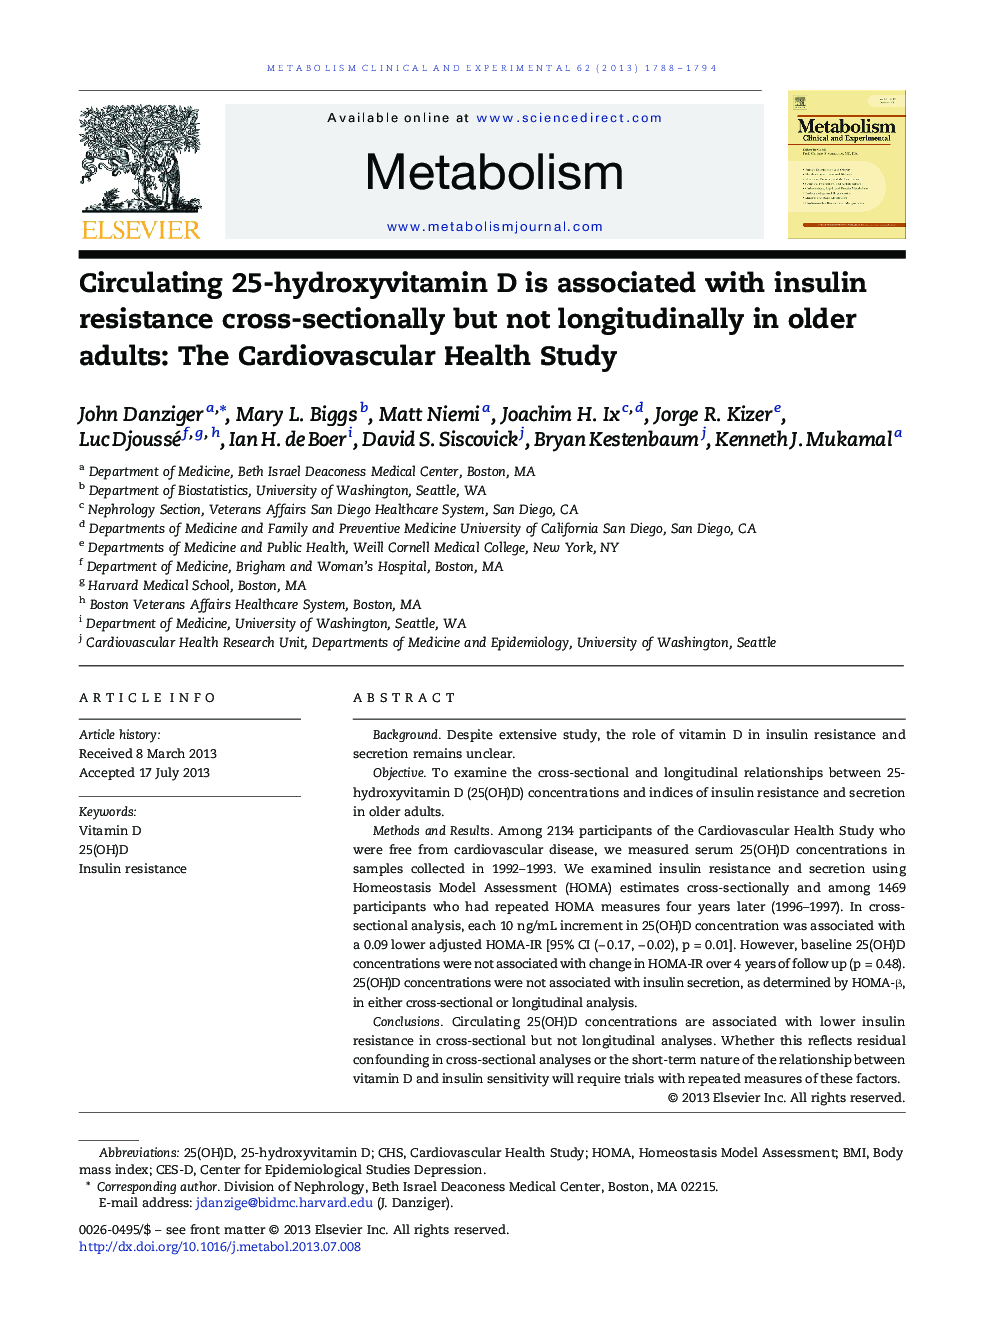 Circulating 25-hydroxyvitamin D is associated with insulin resistance cross-sectionally but not longitudinally in older adults: The Cardiovascular Health Study